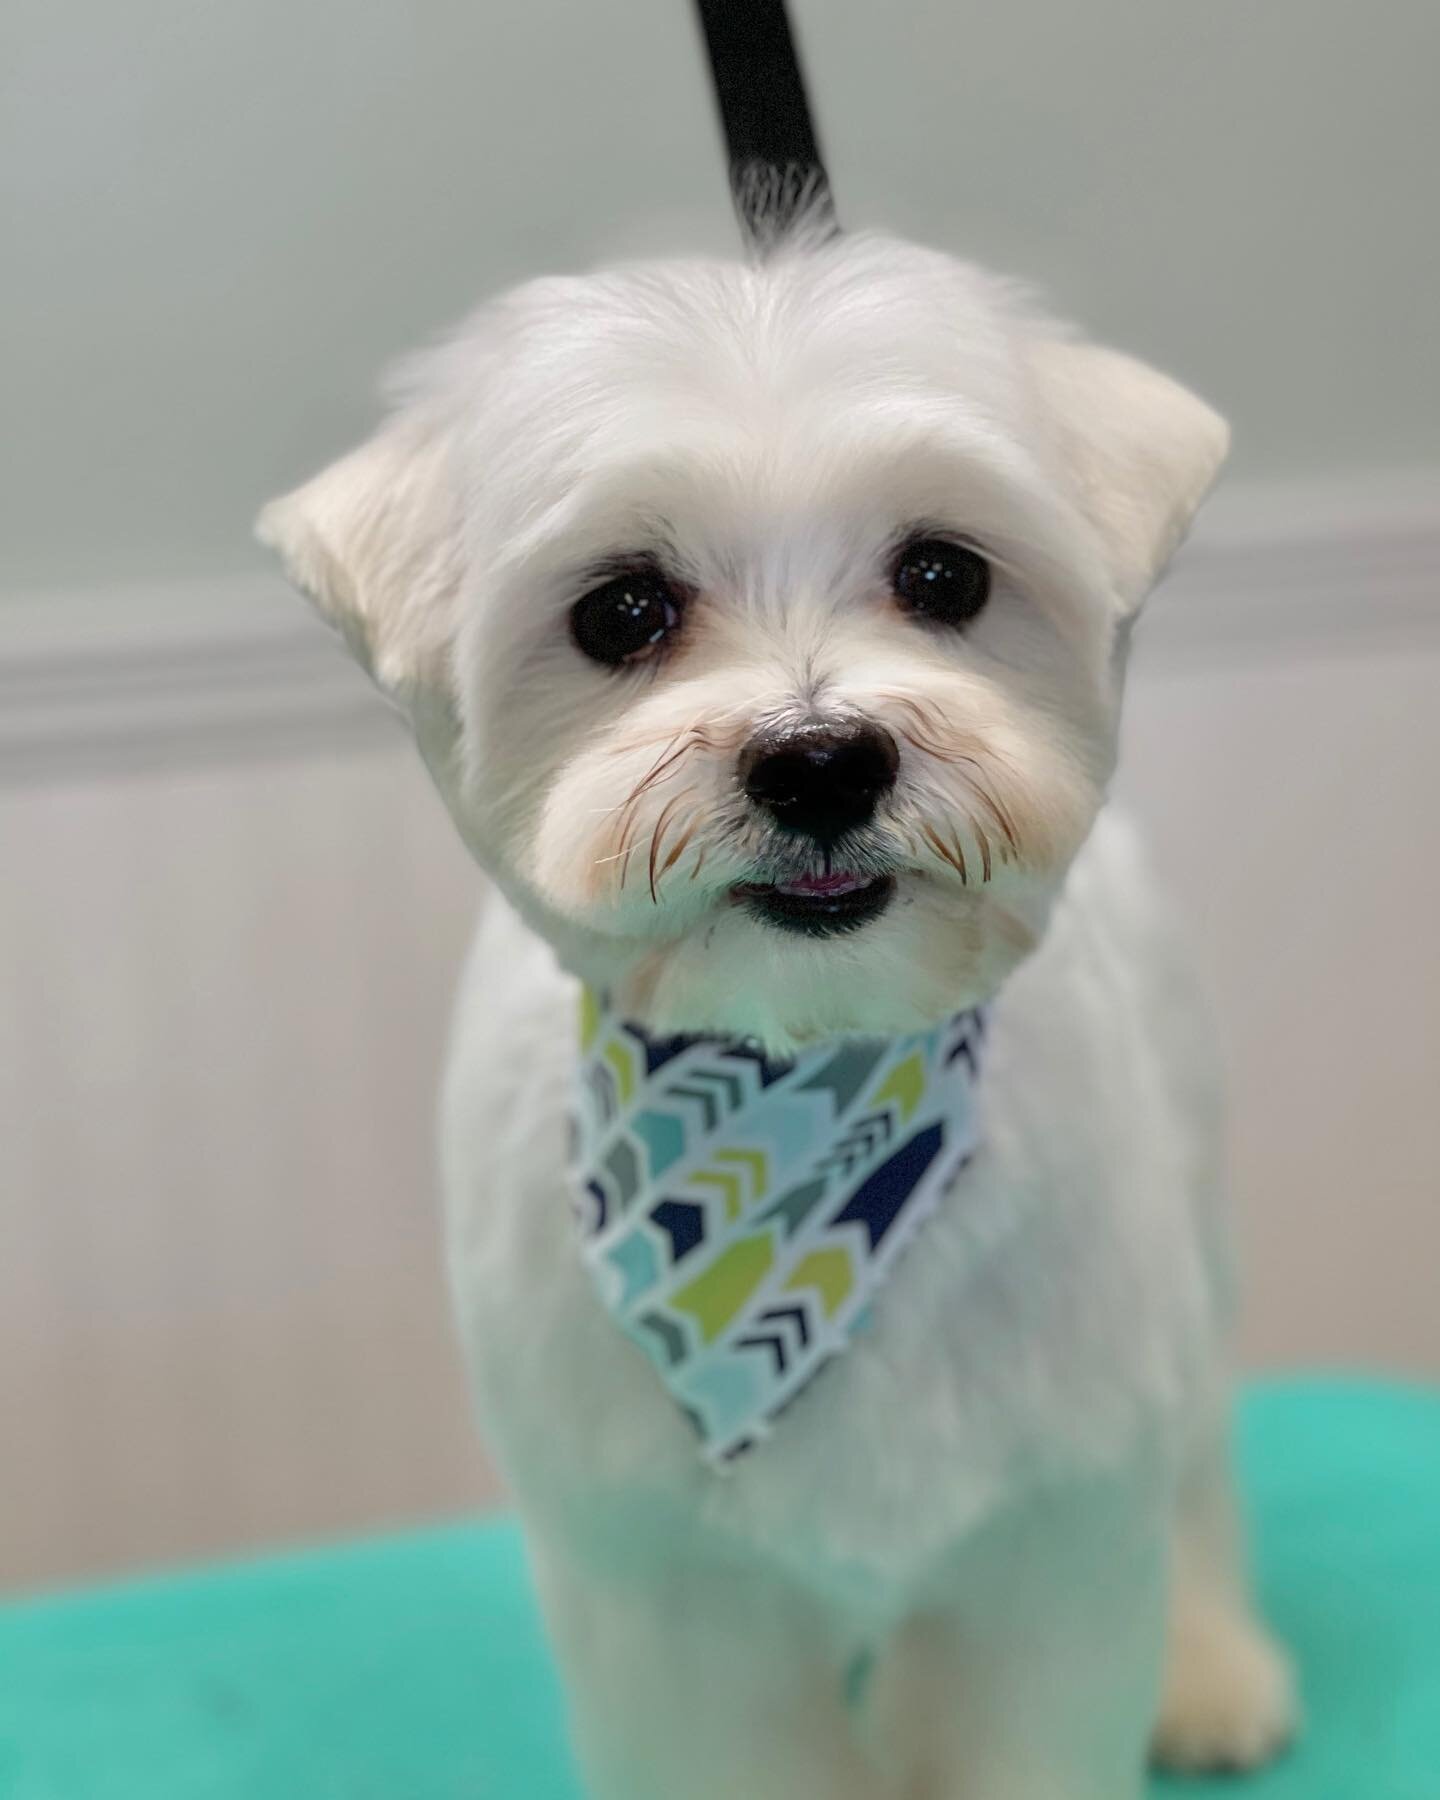 Ollie came in for the first time and is such a cutie 😍

Mary did such a great job on his haircut!

#maltese #malteseofinstagram #sandiego #dogsofinstagram #sandiegodogs #sandiegodogsofinstagram #grooming #sandiegogroomers #groomersofinstagram #groom